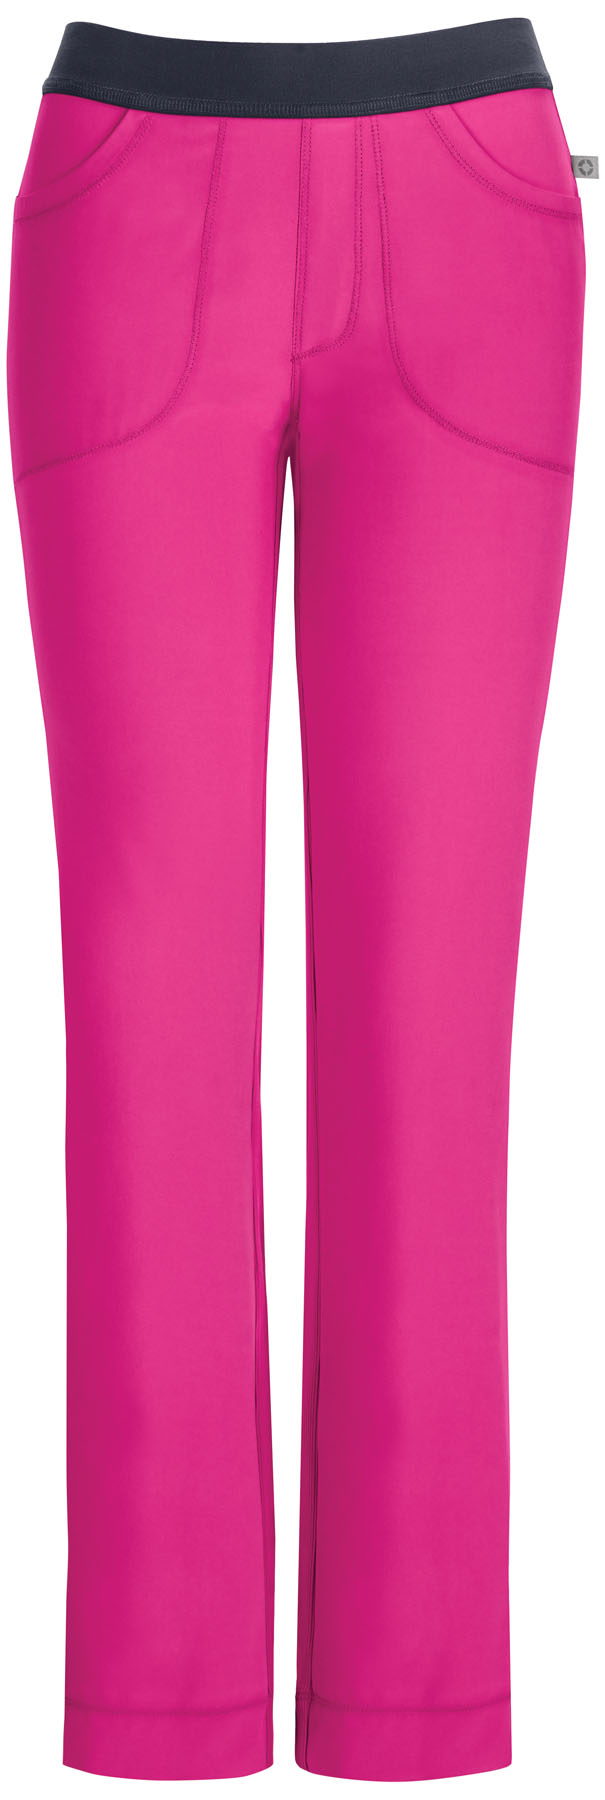 Scrubs Cherokee Low Rise Pull-On Pant 1124A CPPS Carmine Pink Free Shipping 